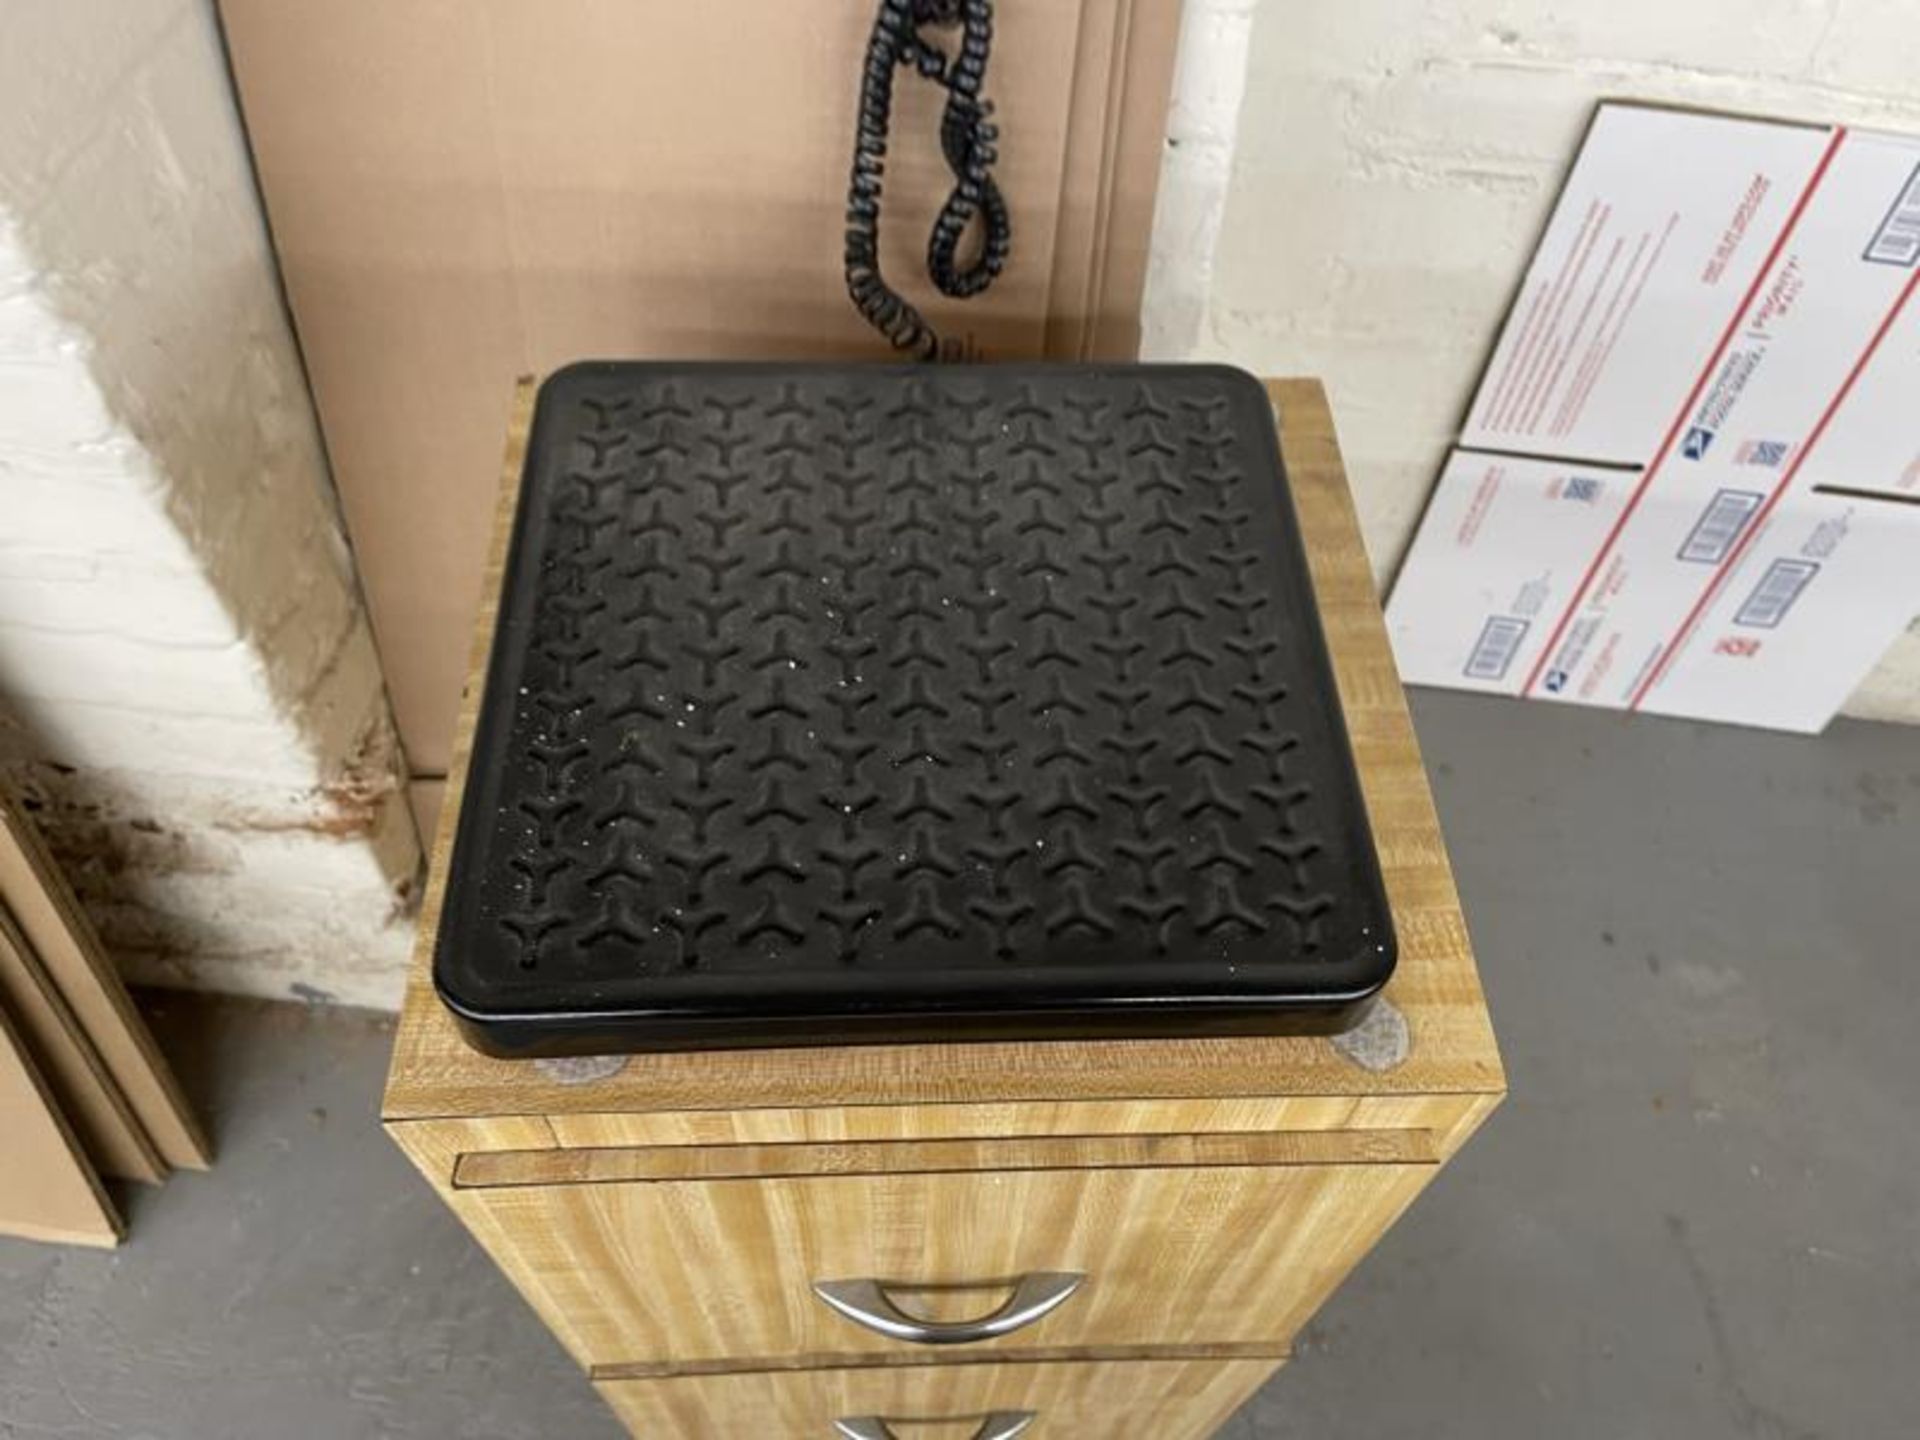 Uline 400Lbs Capacity Shipping Scale - Image 3 of 3